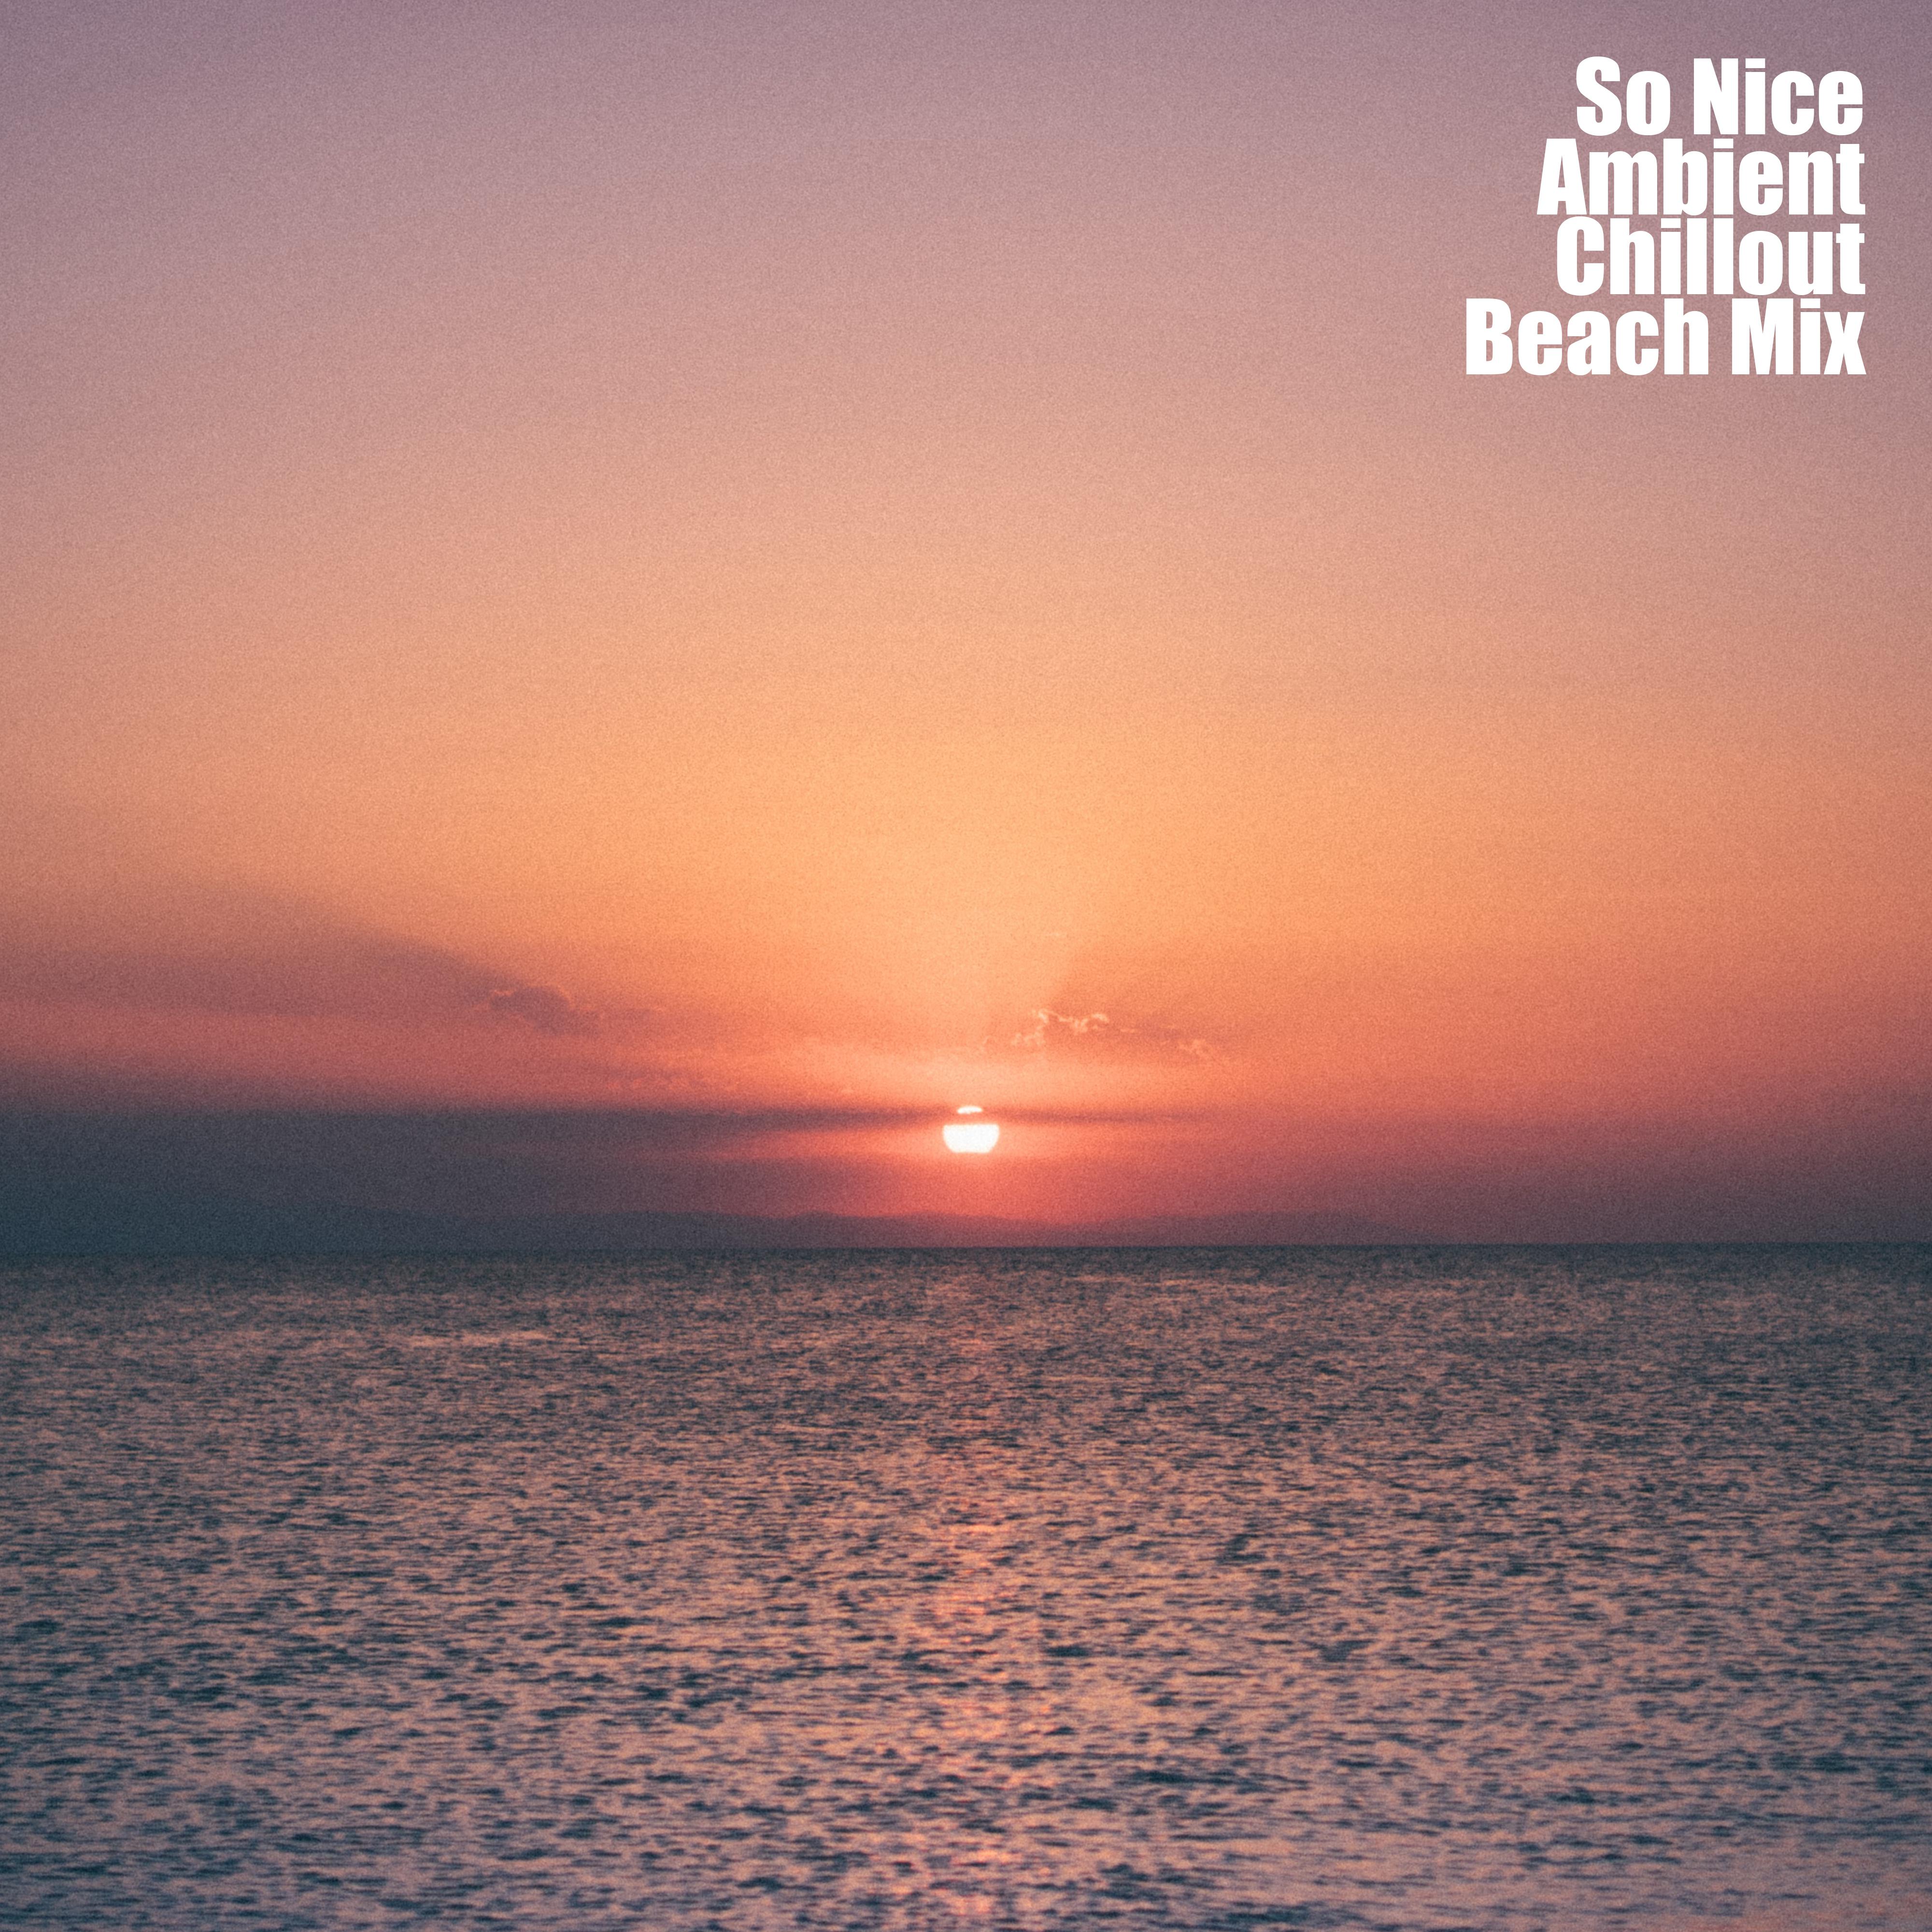 So Nice Ambient Chillout Beach Mix: 2019 Chill Out Summer Ambient Music Collection for Best Vacation Relaxation, Delicate Melodies, Ambitious Songs Holiday Top Selection